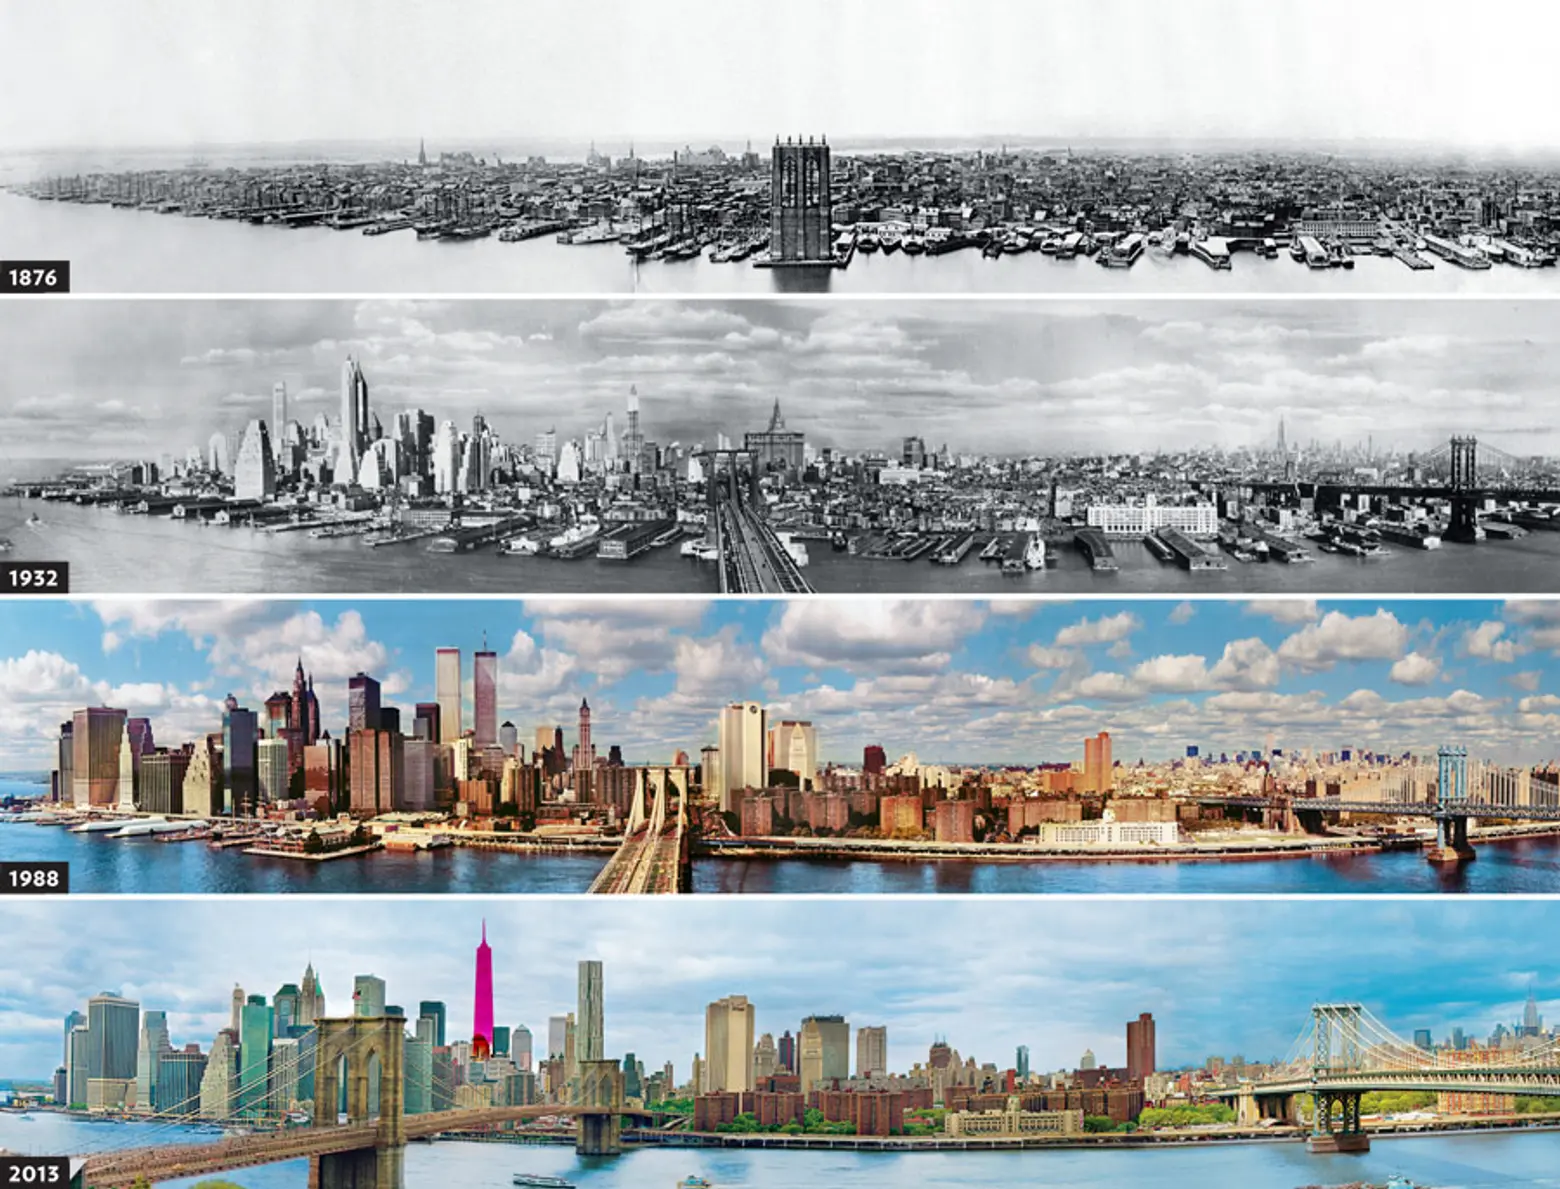 These photos of Manhattan from Brooklyn stitched together show how things have changed, though you don't get to see the truly famous skyscrapers from this angle.